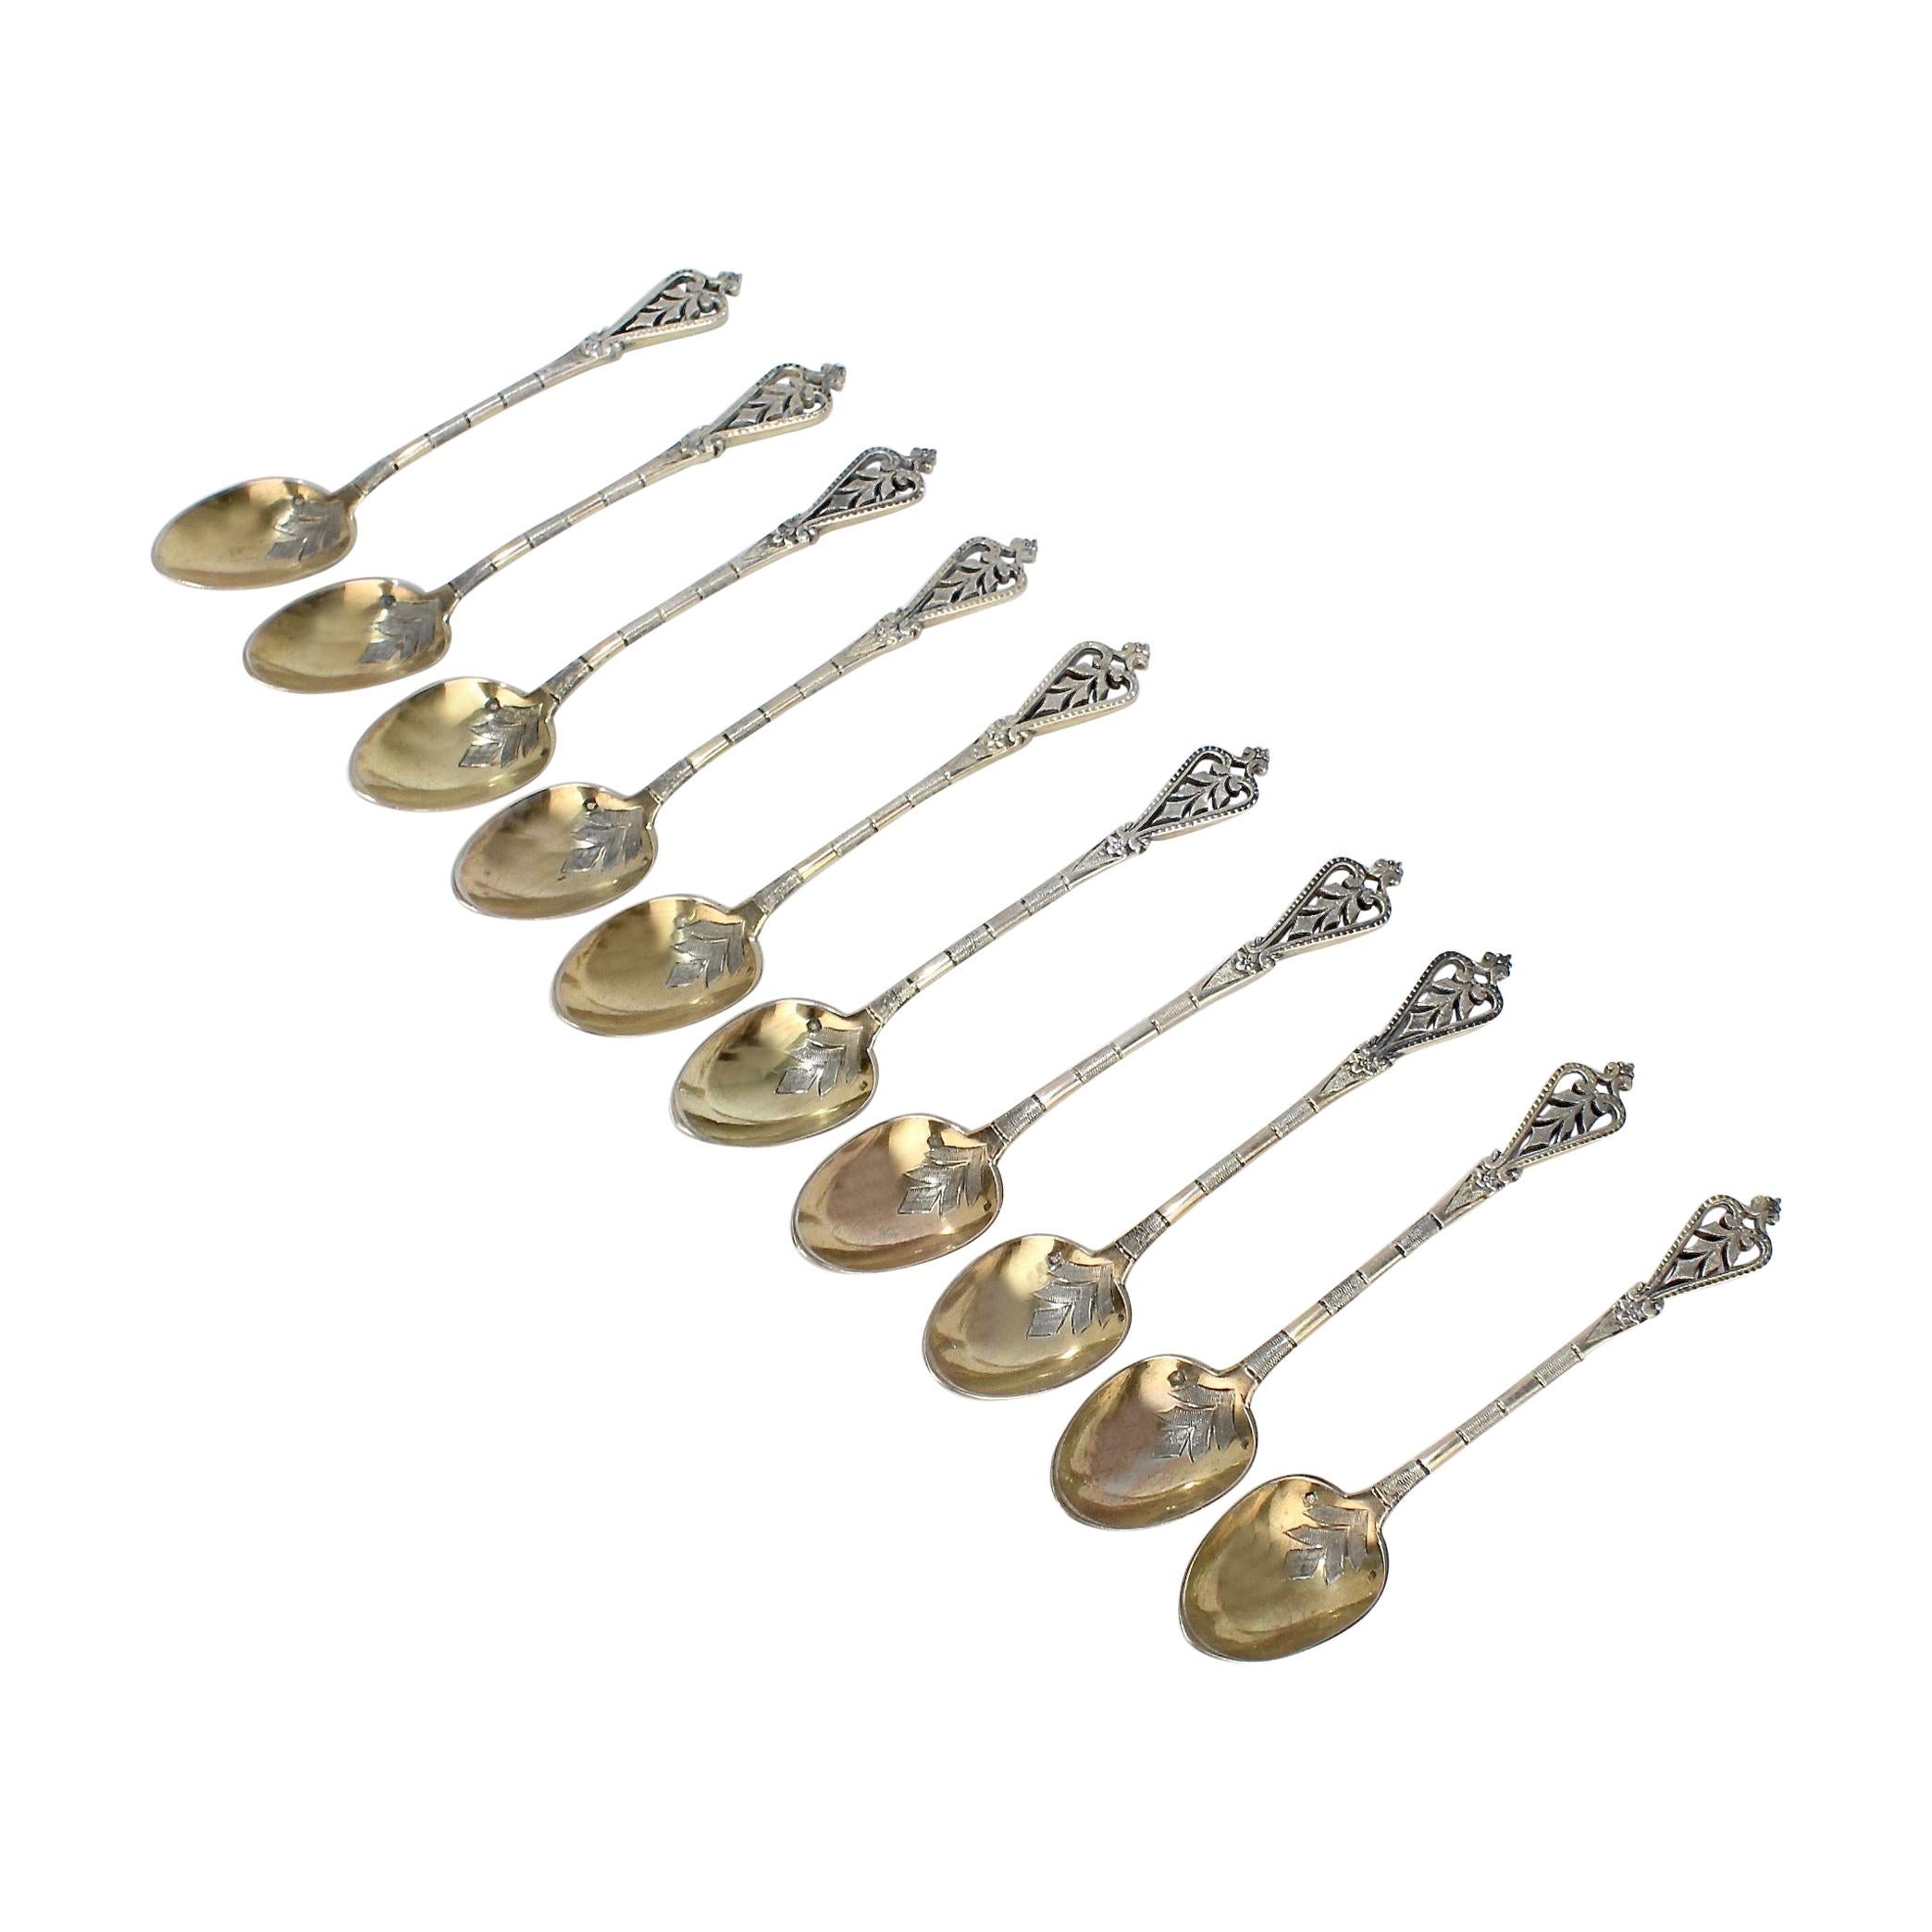 Set of 10 Antique French Gilt Sterling Silver Demitasse Spoons by Boyer-Callot